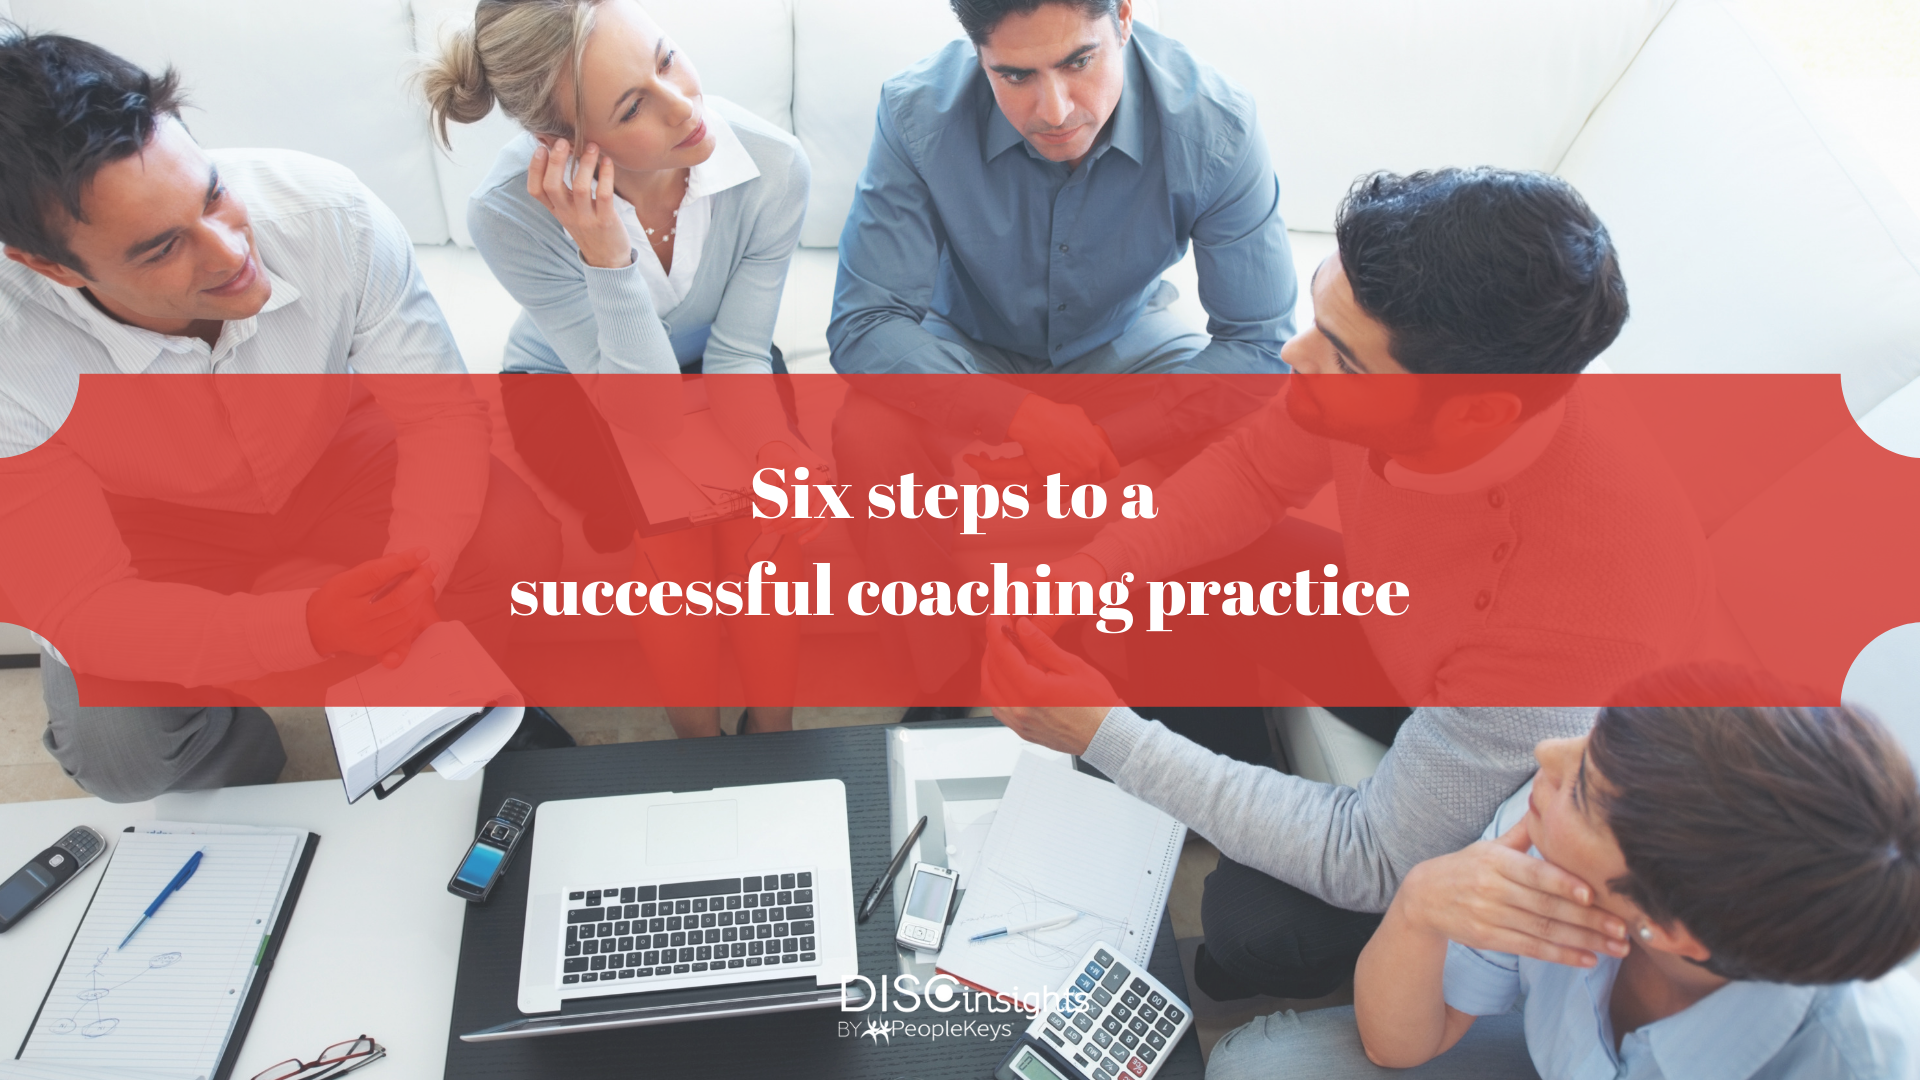 6 Steps To A Successful Coaching Practice